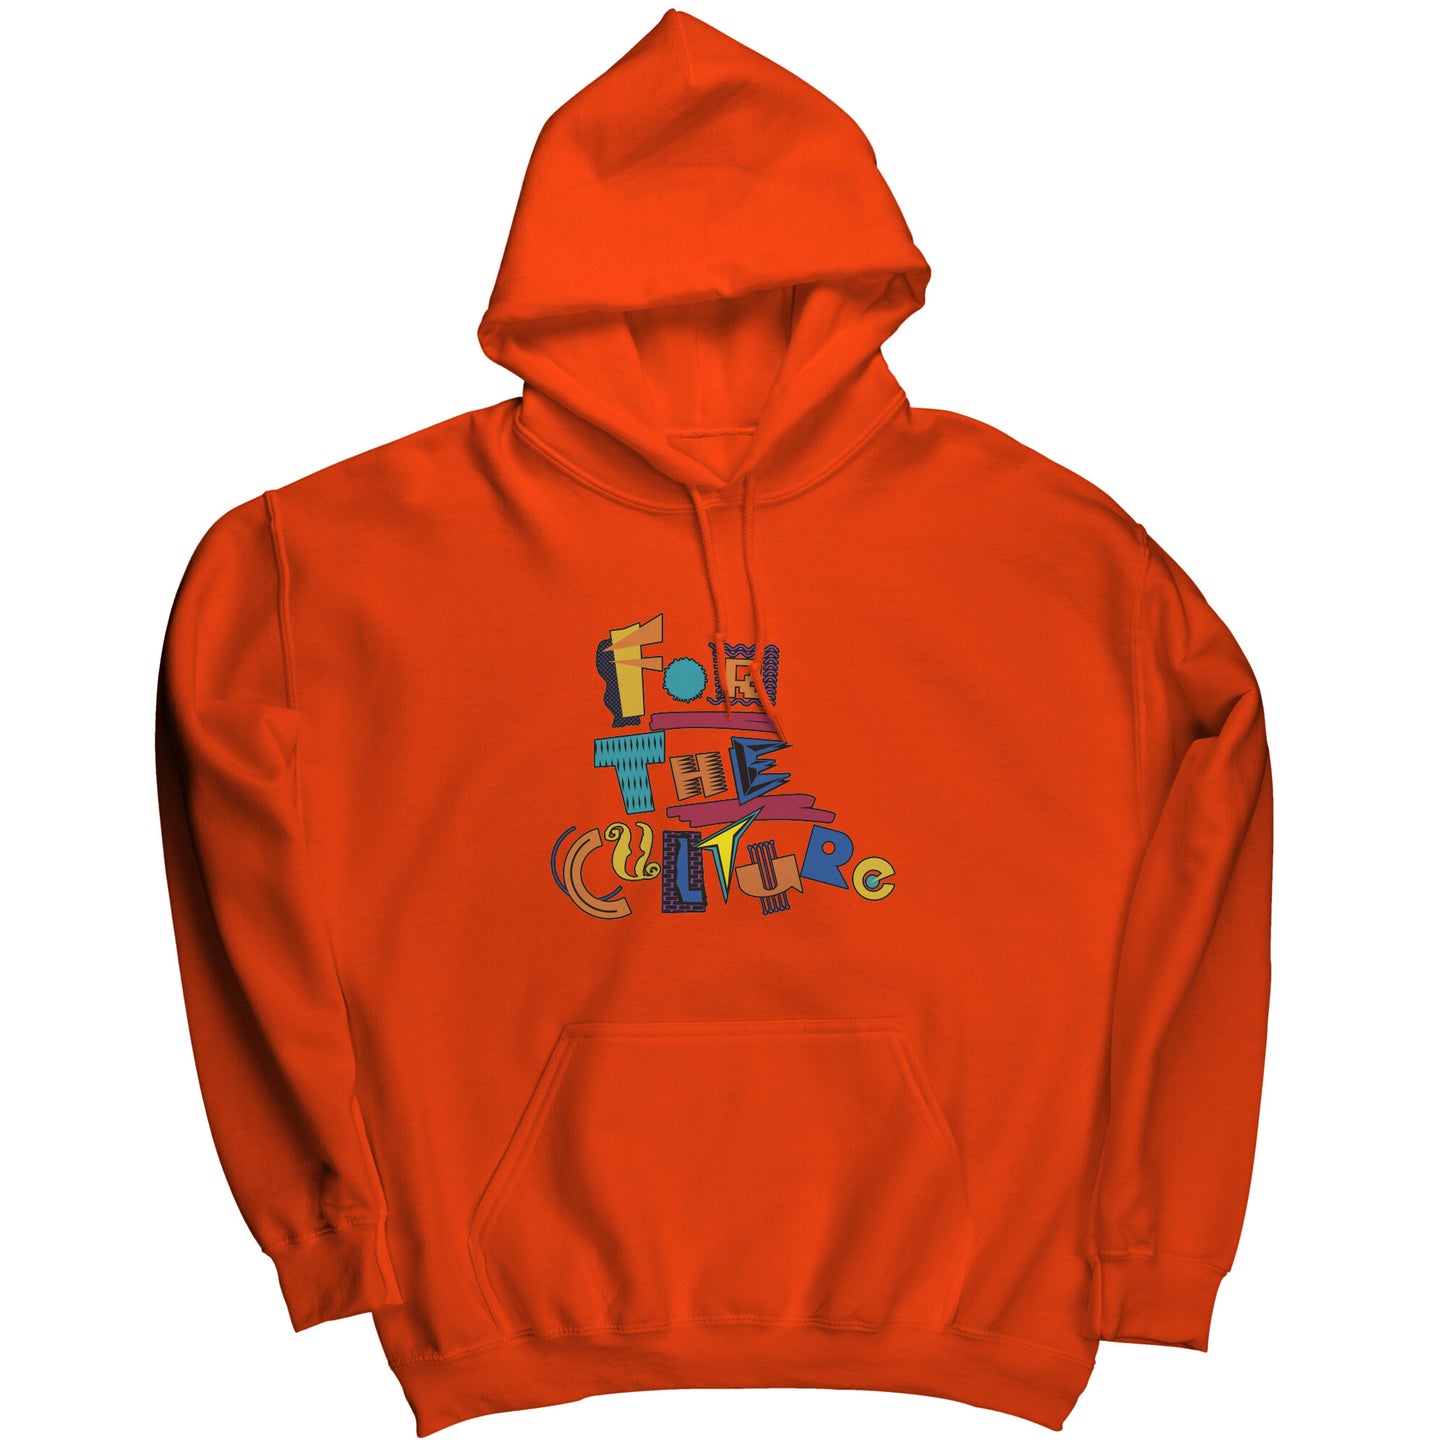 In Living Color: For The Culture Hoodie